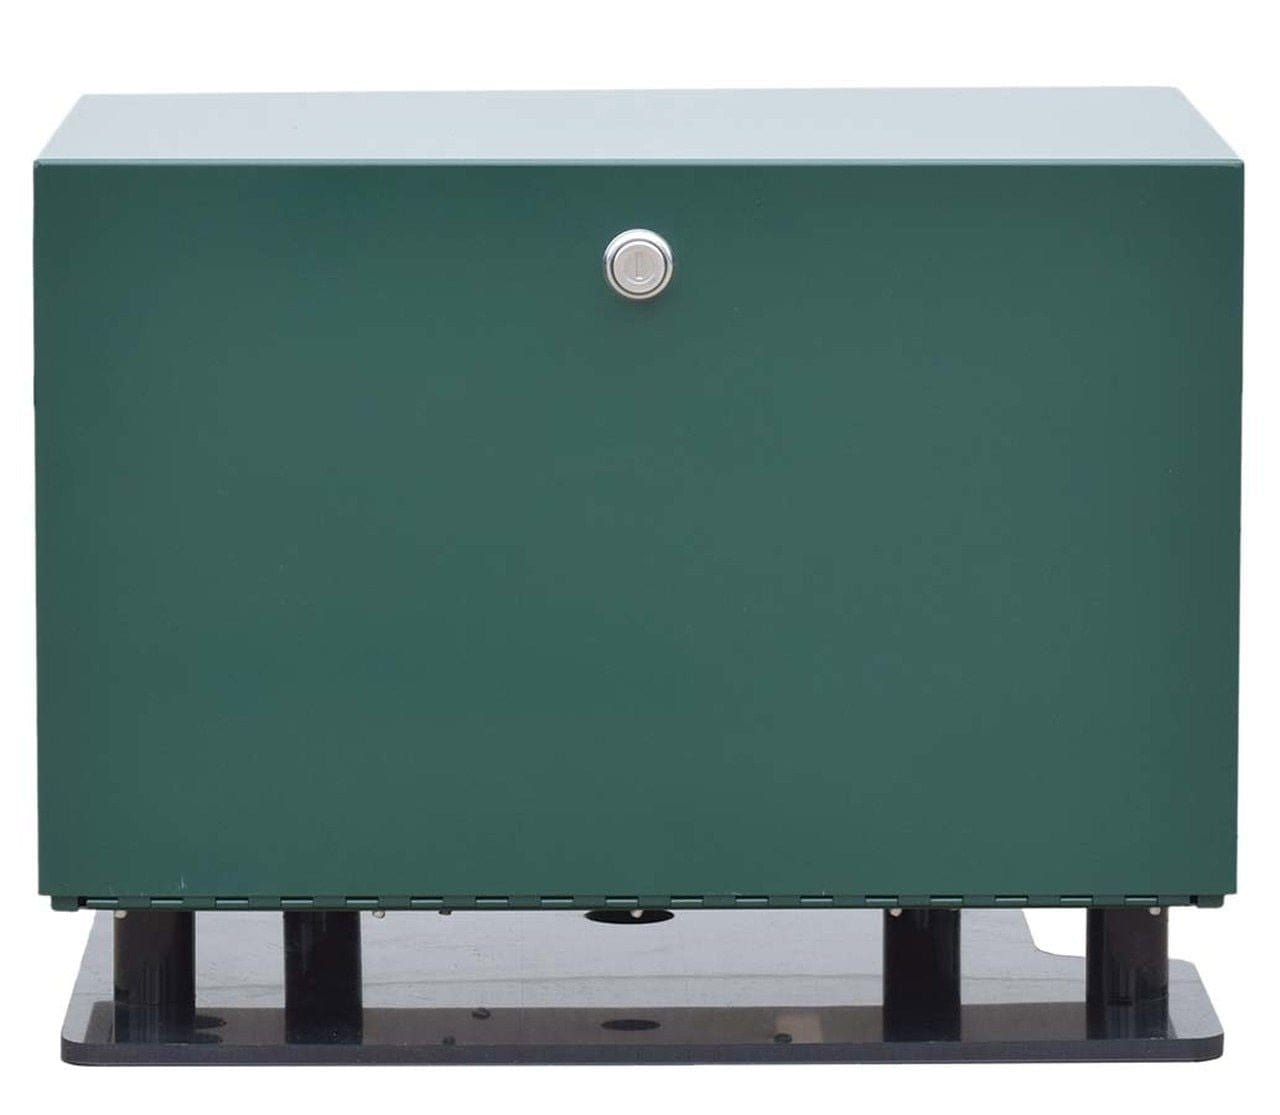 EasyPro Aerator System Parts Small Ground Mounted Steel Cabinet Ground Mounted Cabinet | Small Steel Storage Cabinet